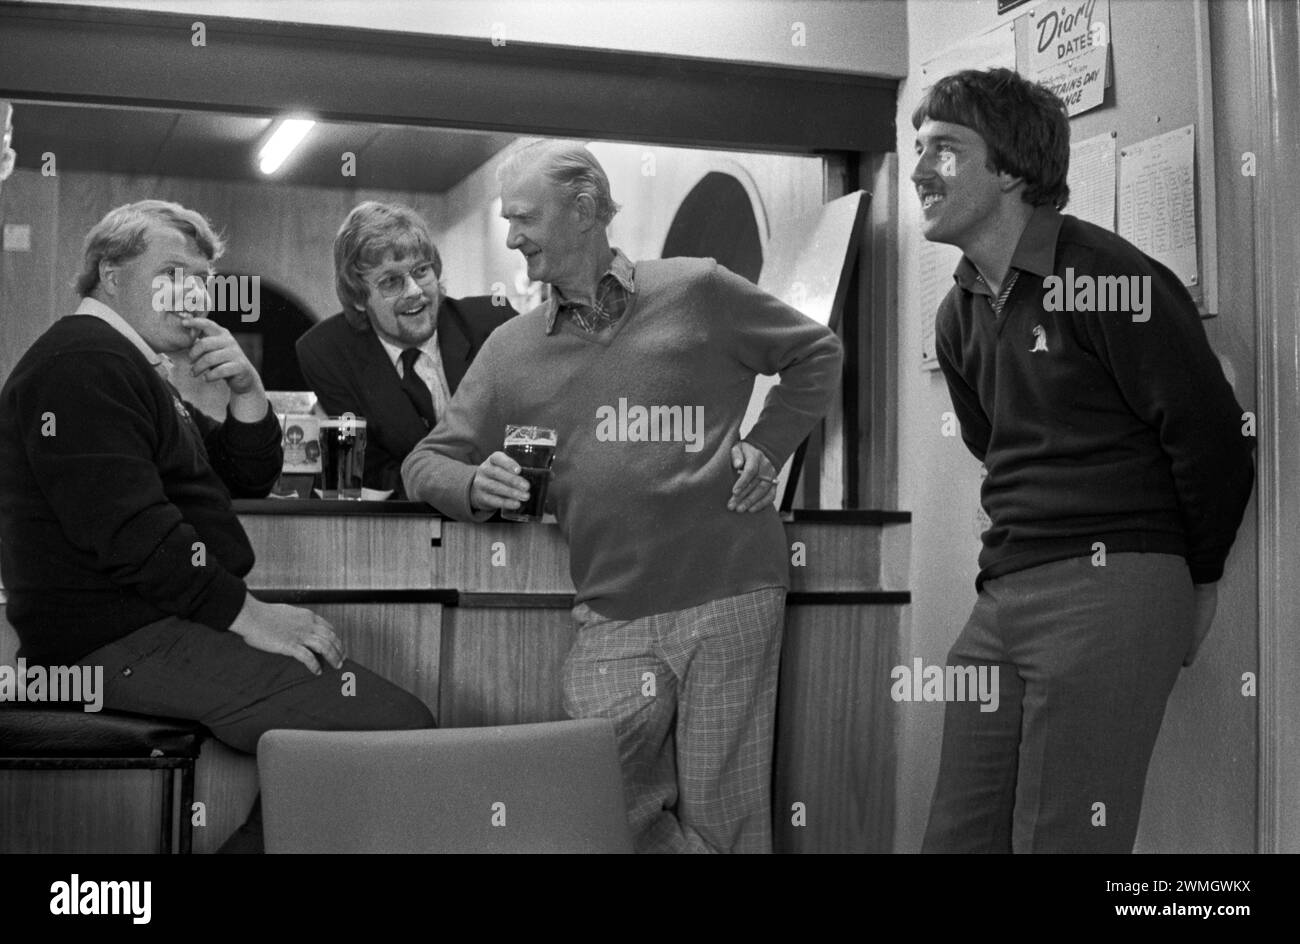 Men propping up the bar in a private members golf club 1980s UK. Didsbury Golf Club. Didsbury, Manchester, England UK 1981 HOMER SYKES Stock Photo